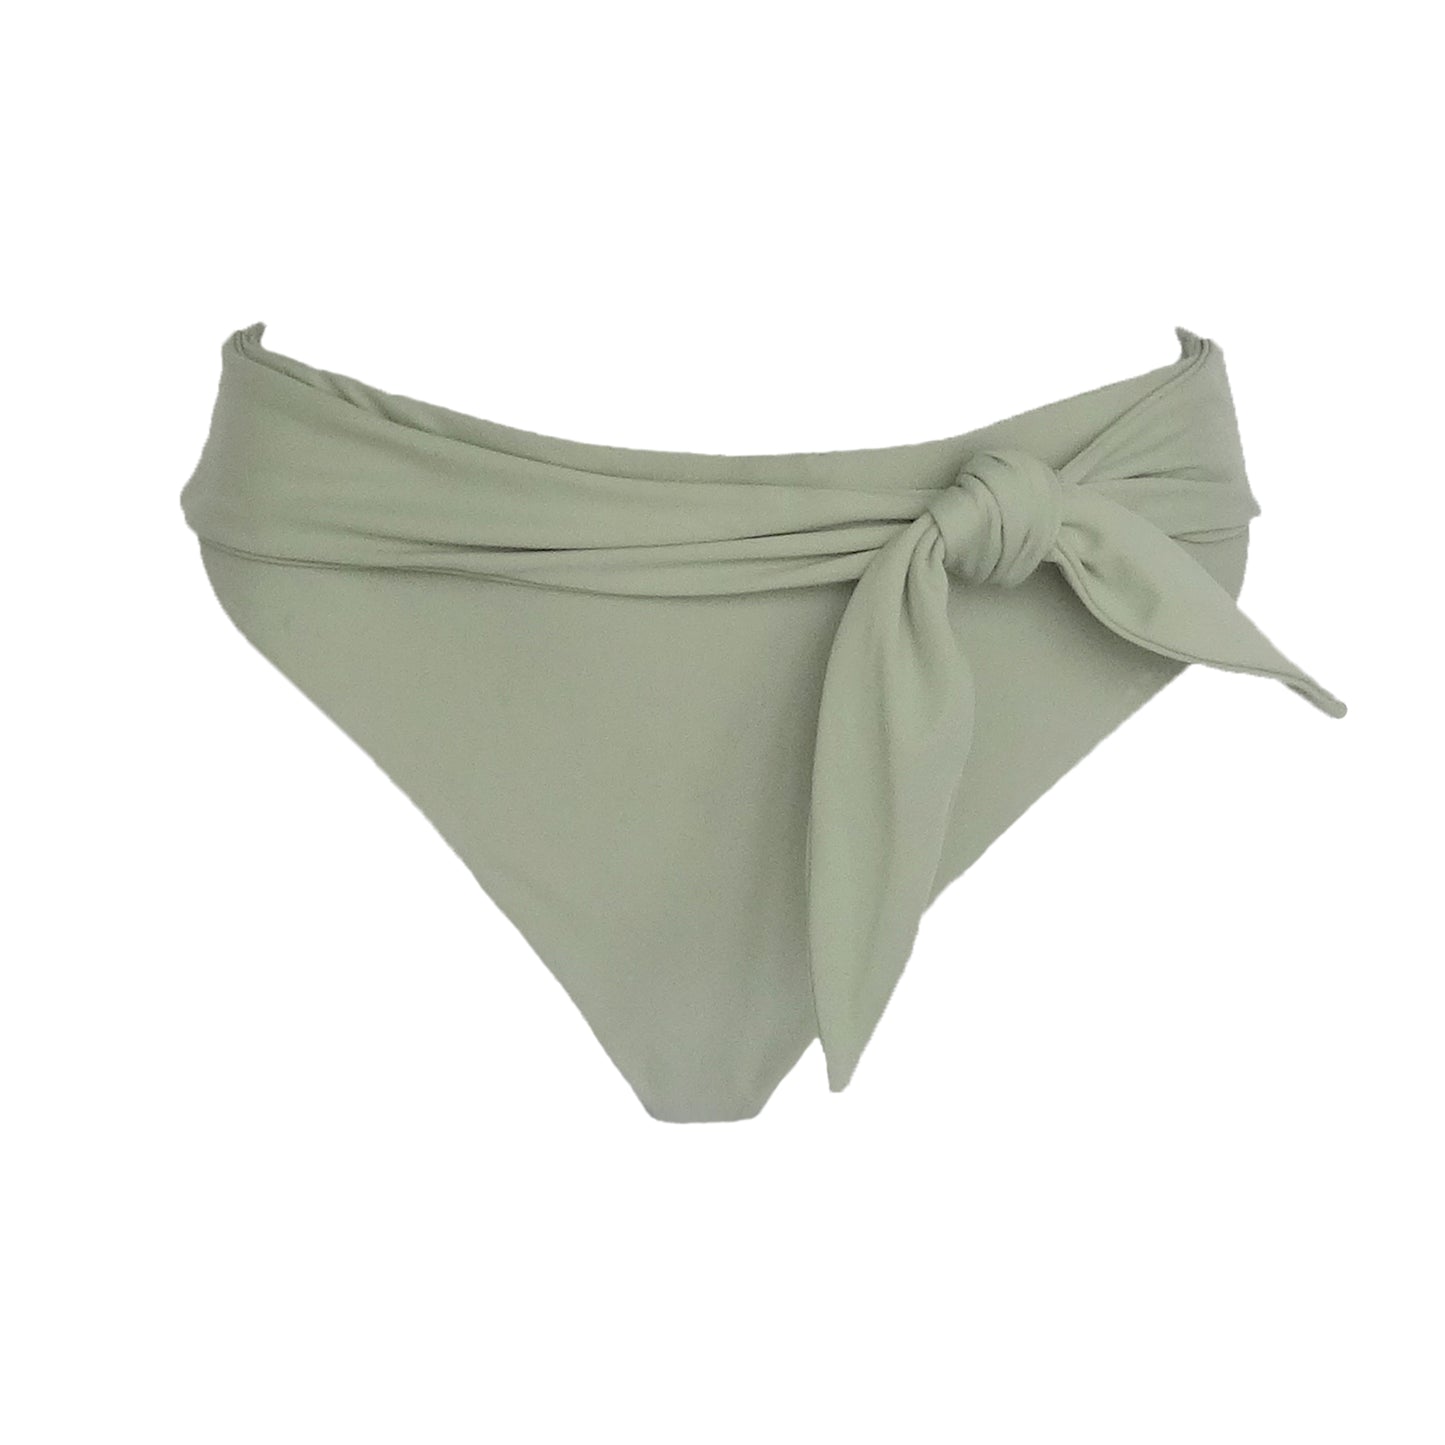 Sage mid rise bikini bottom with added front tie belt detail and cheeky bum coverage.